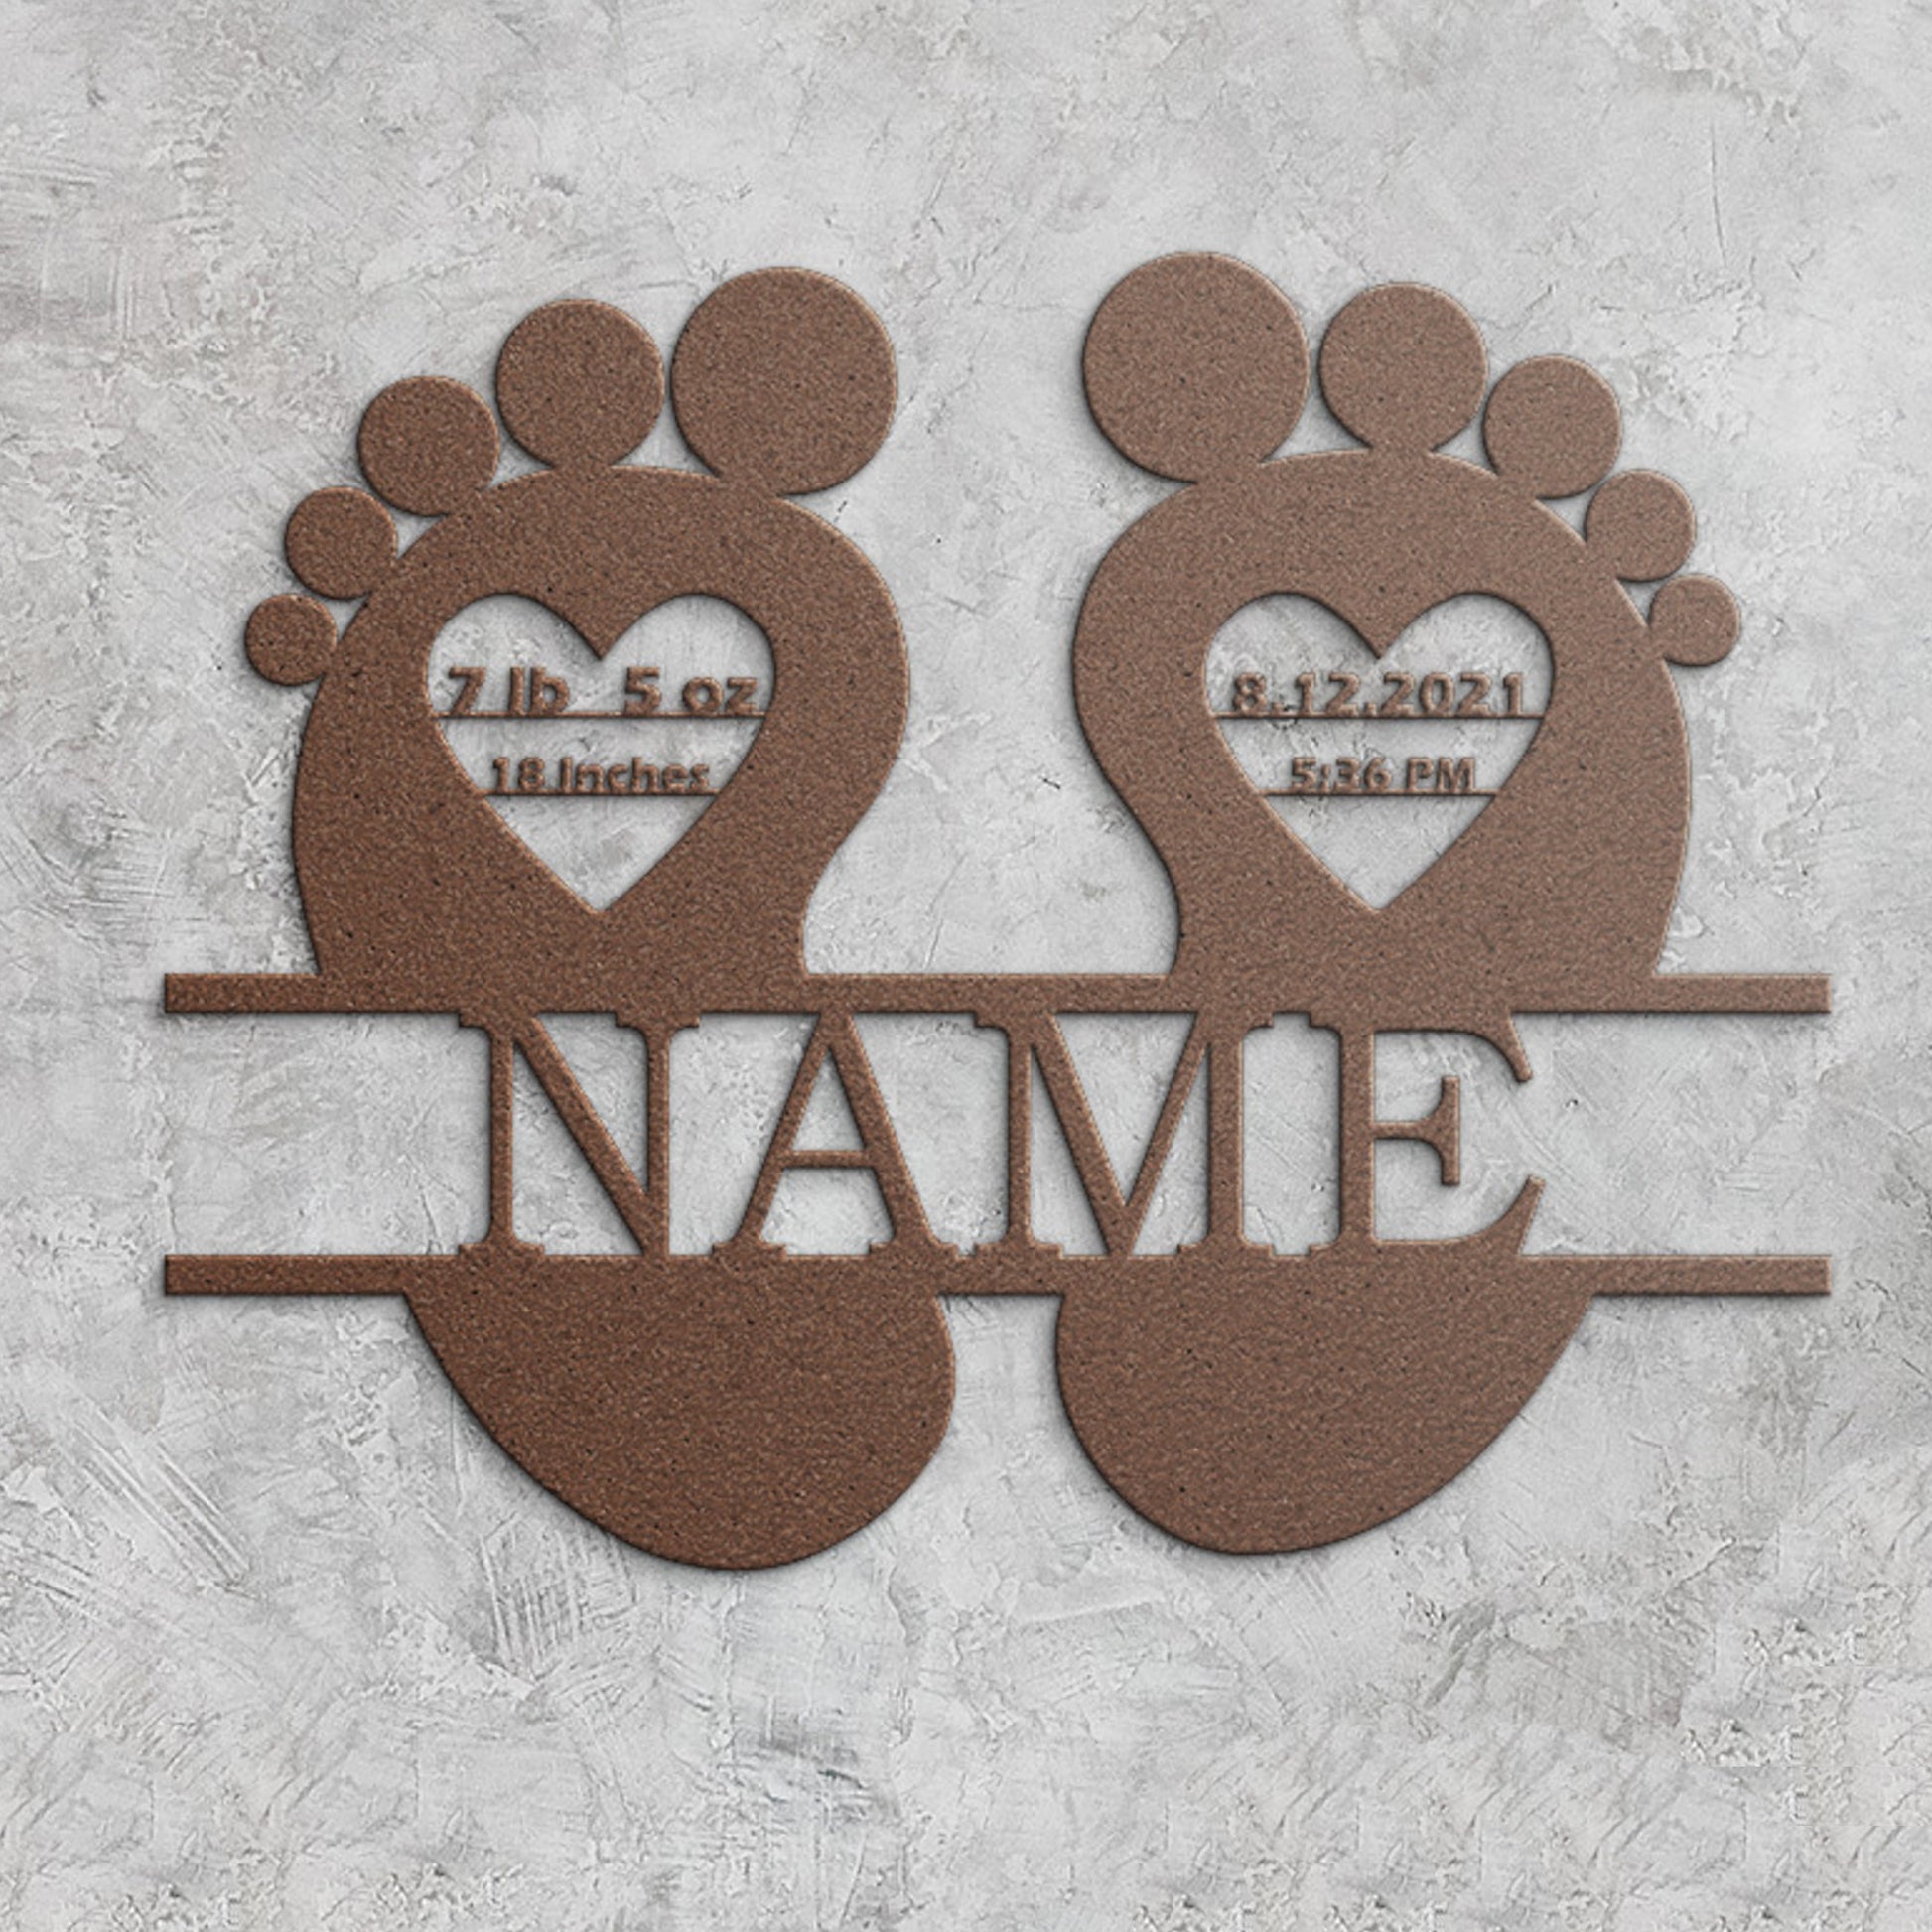 Personalized Baby Footprint Birth Announcement Metal Sign. Baby Shower Name Gift. Kids Room Decor. New Born Custom Baby Arrival Announcement